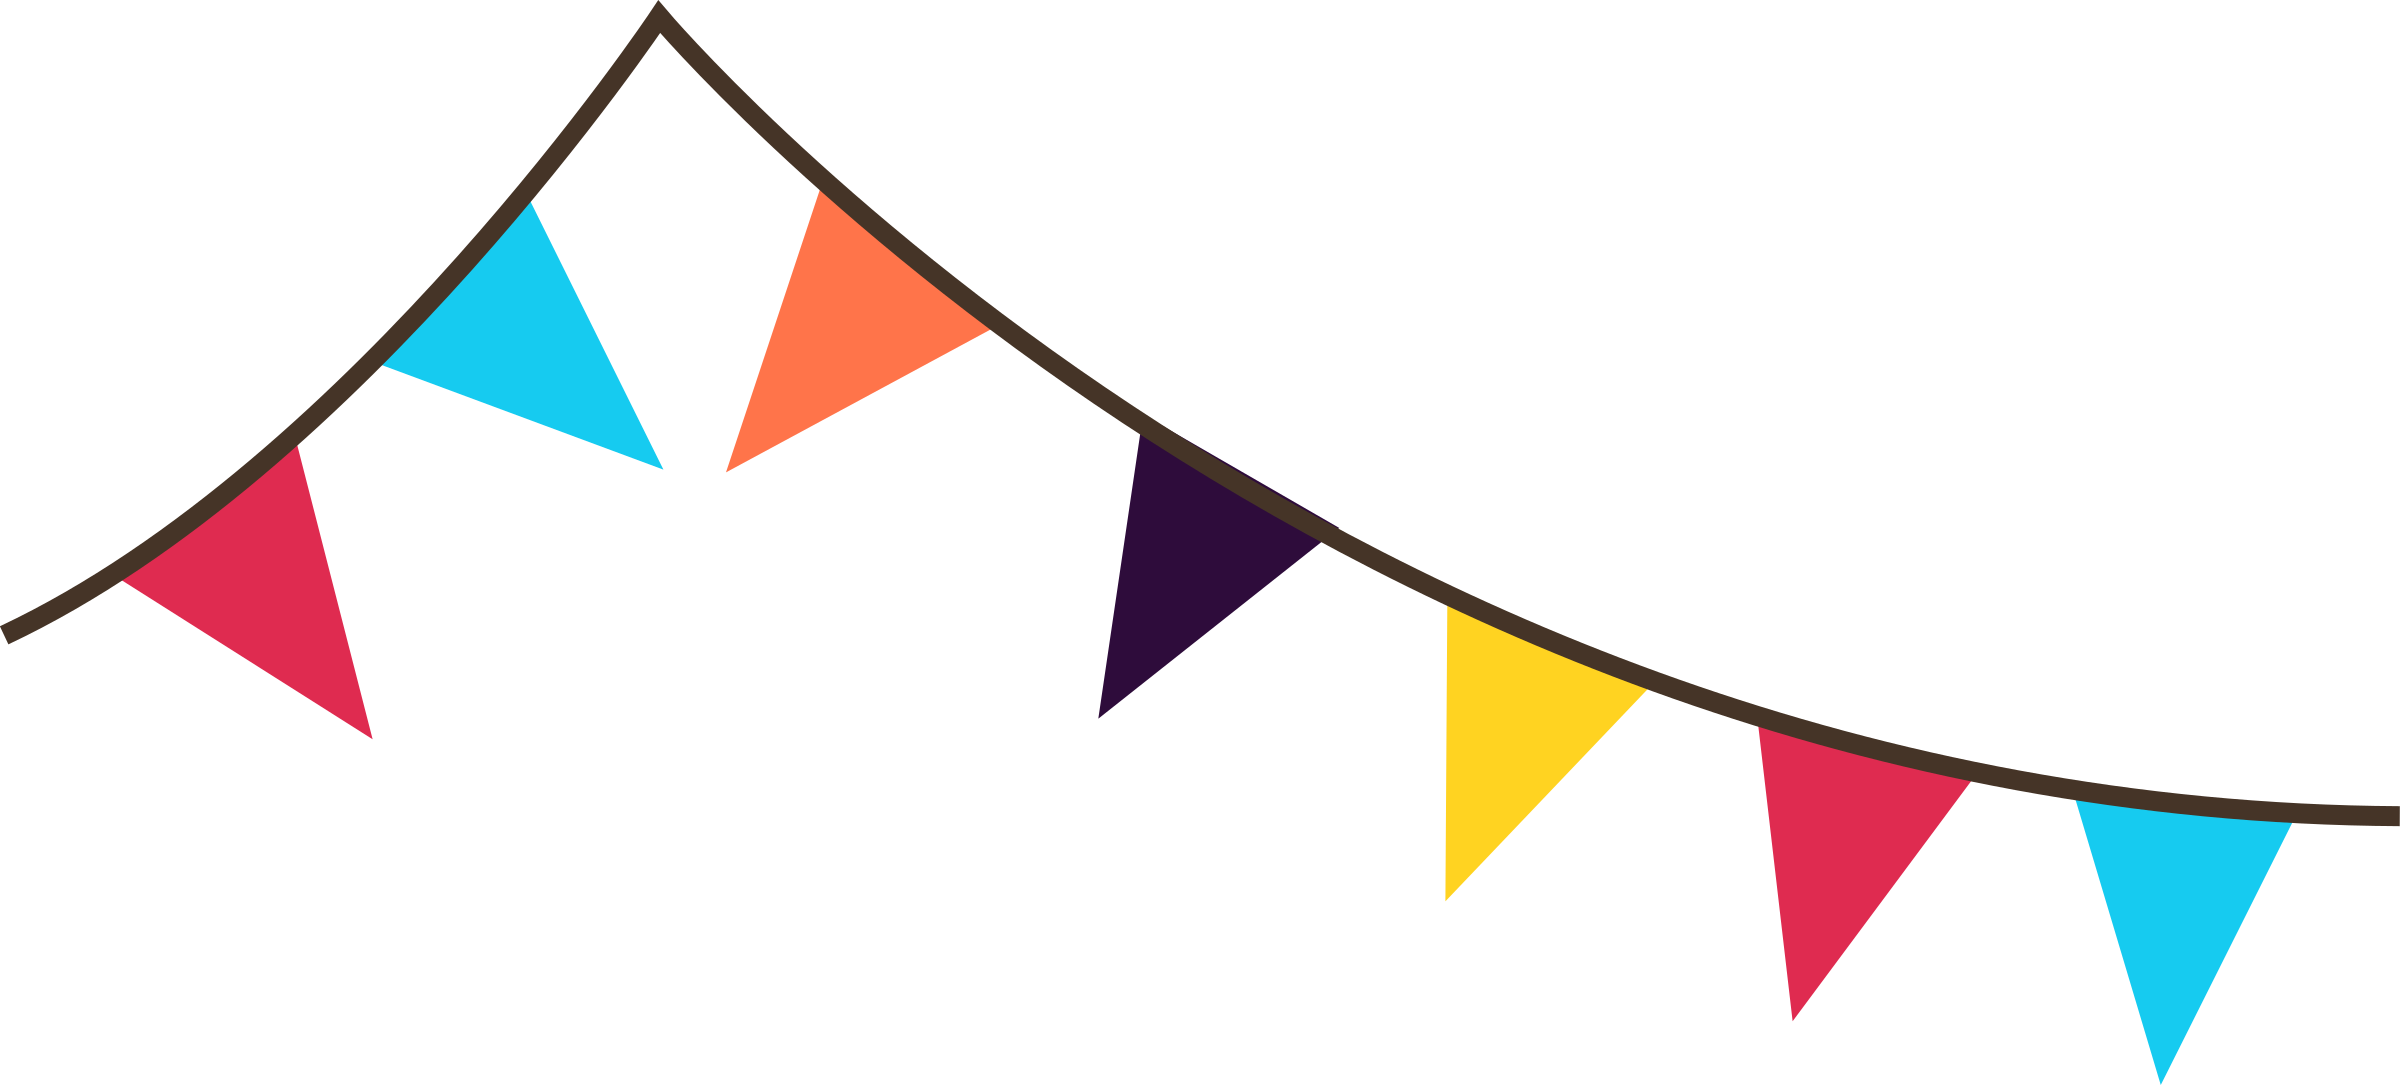 Pennant banner clipart png